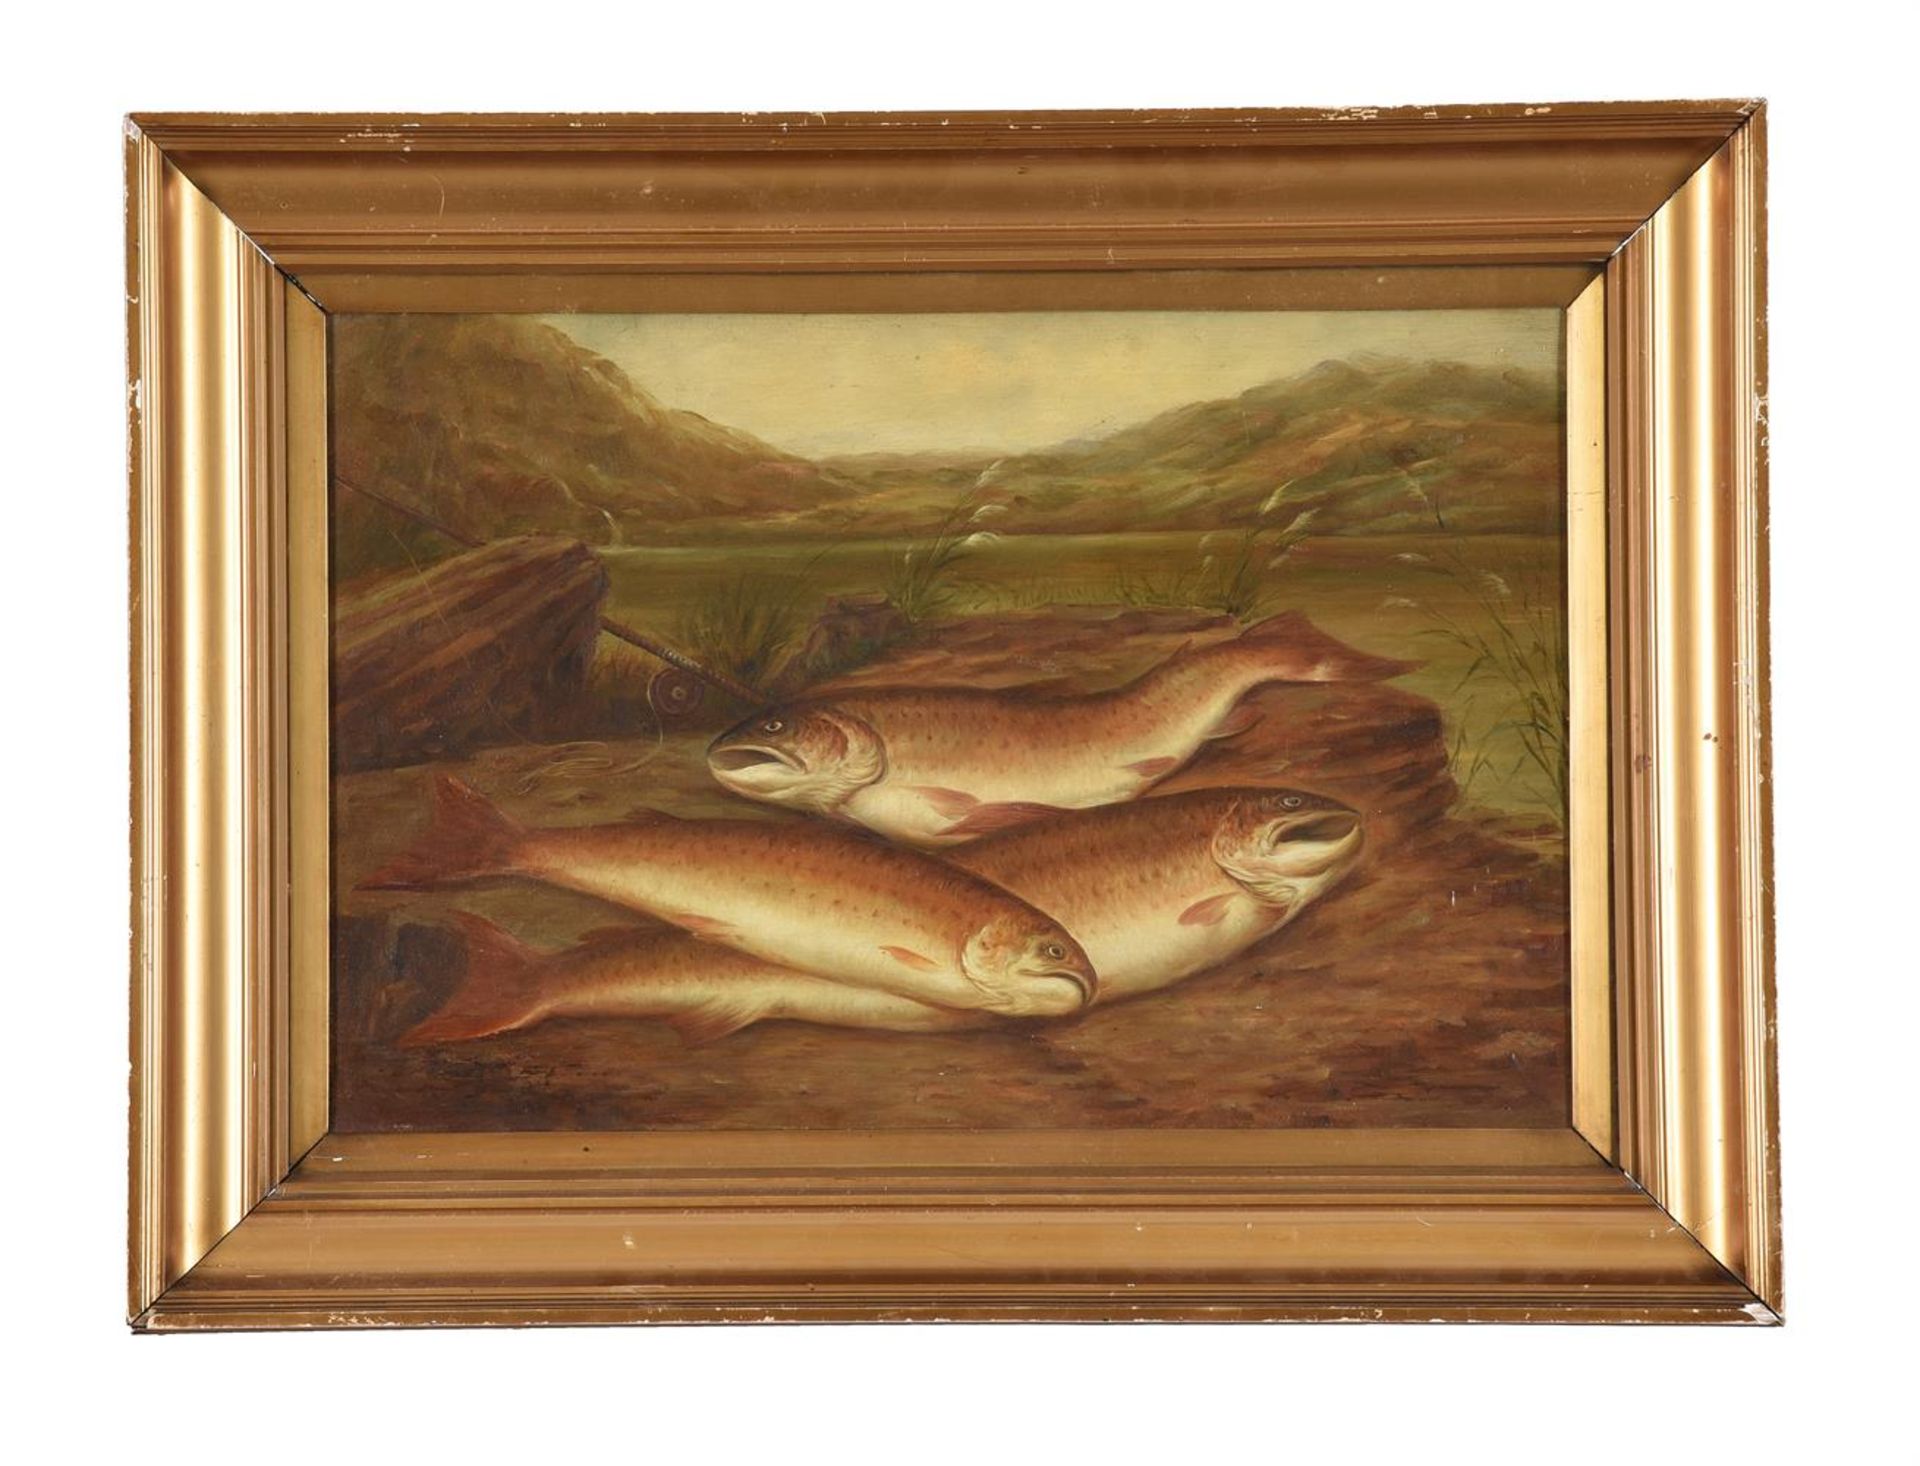 ATTRIBUTED TO ROLAND KNIGHT, FISH ON A RIVERBANK - Image 2 of 3